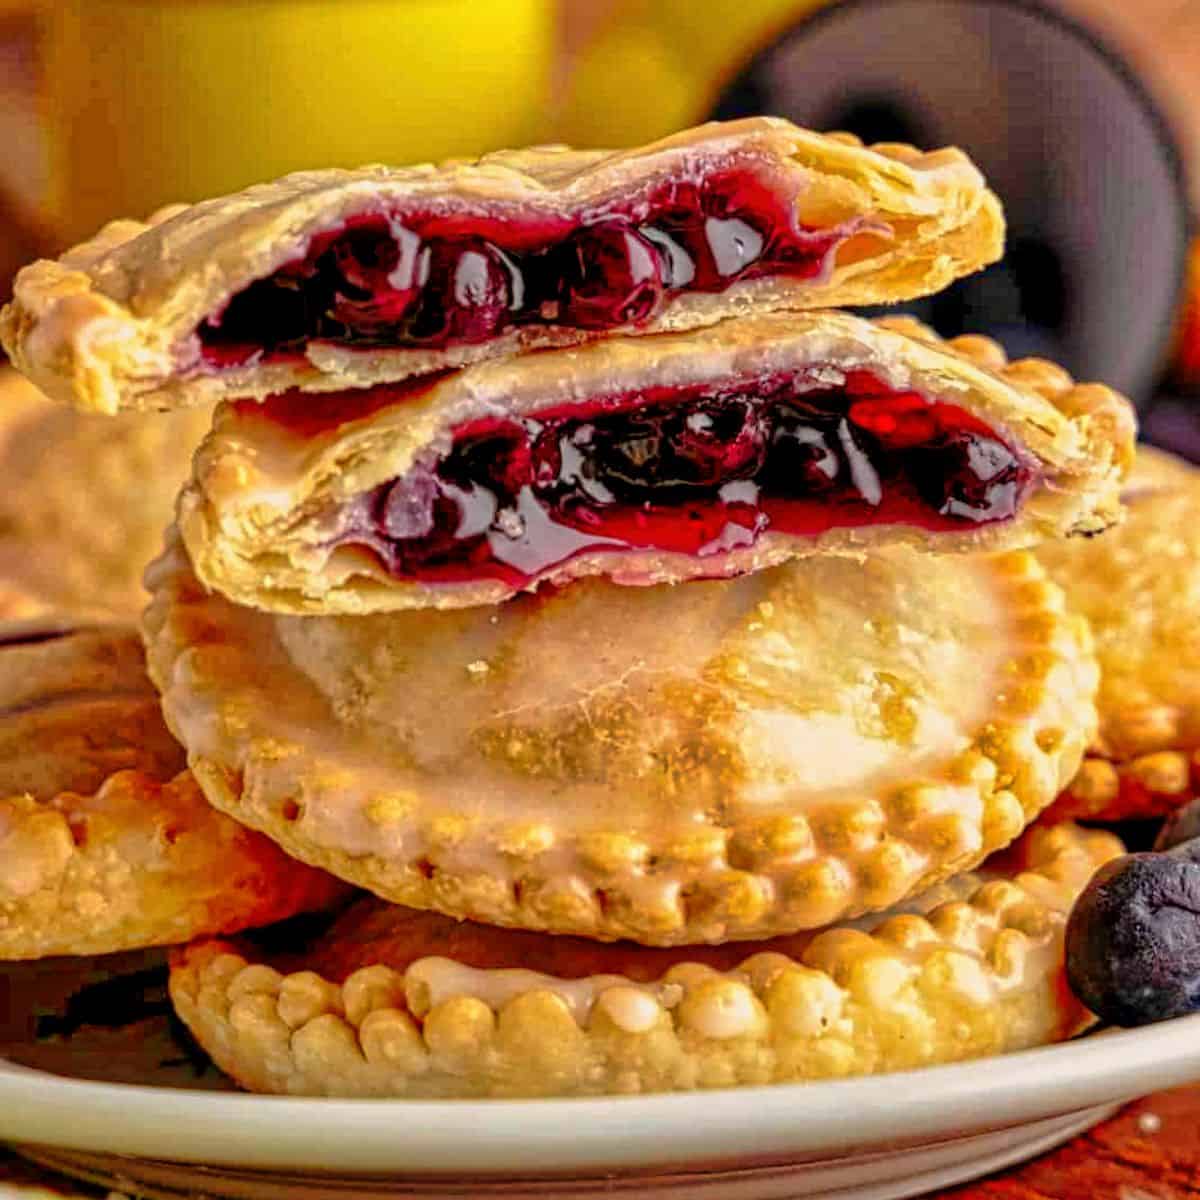 14. Blueberry Hand Pies